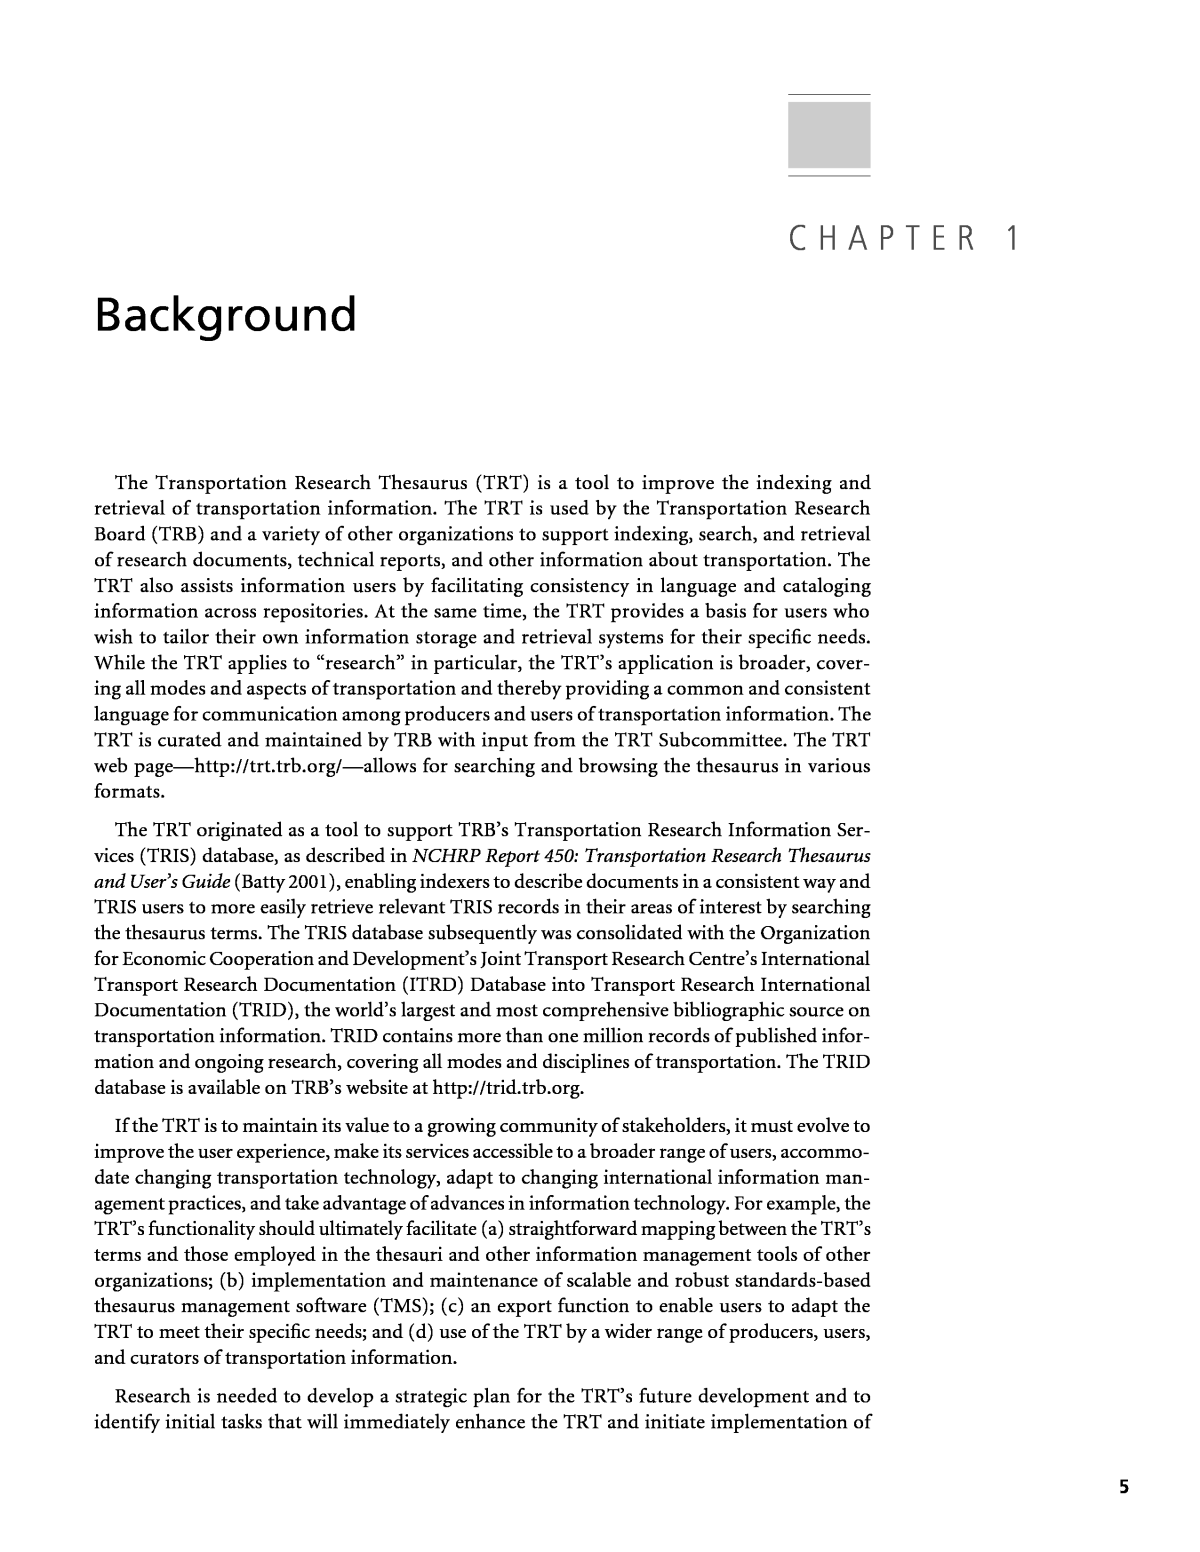 Chapter 1 - Background | The Transportation Research Thesaurus:  Capabilities and Enhancements |The National Academies Press